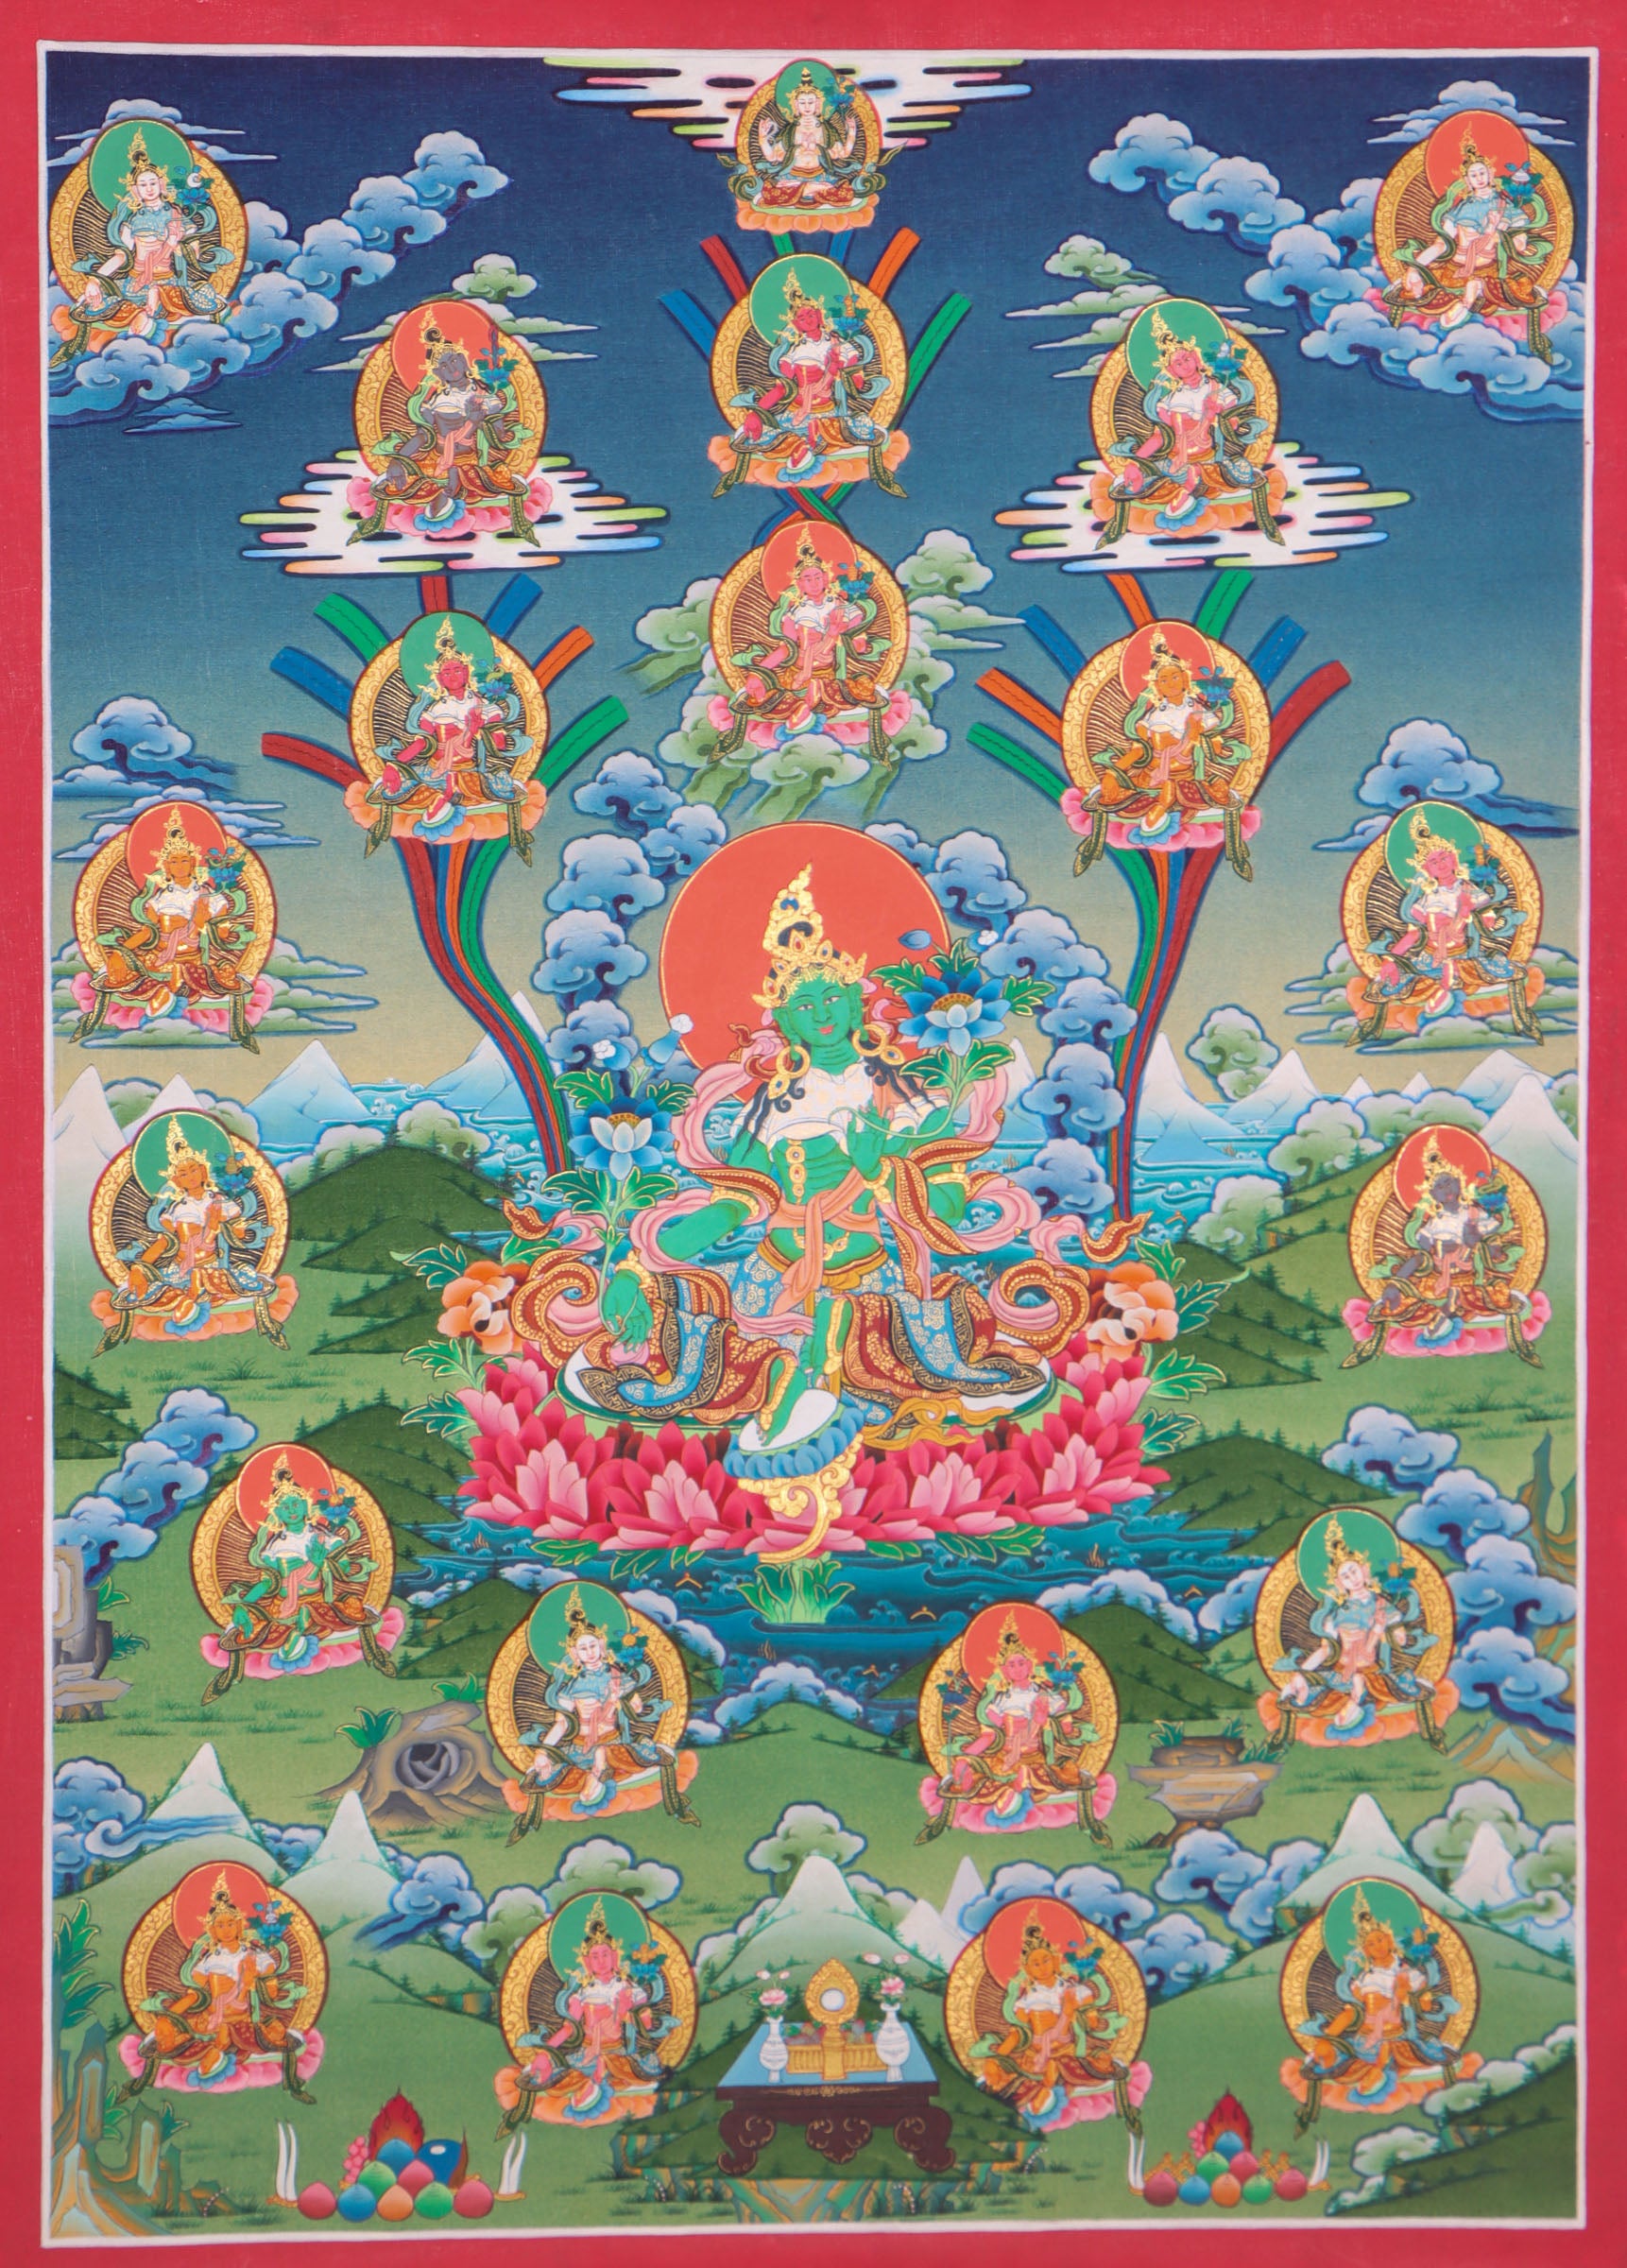 21 Tara thangka painting for protection, healing, and the removal of obstacles.